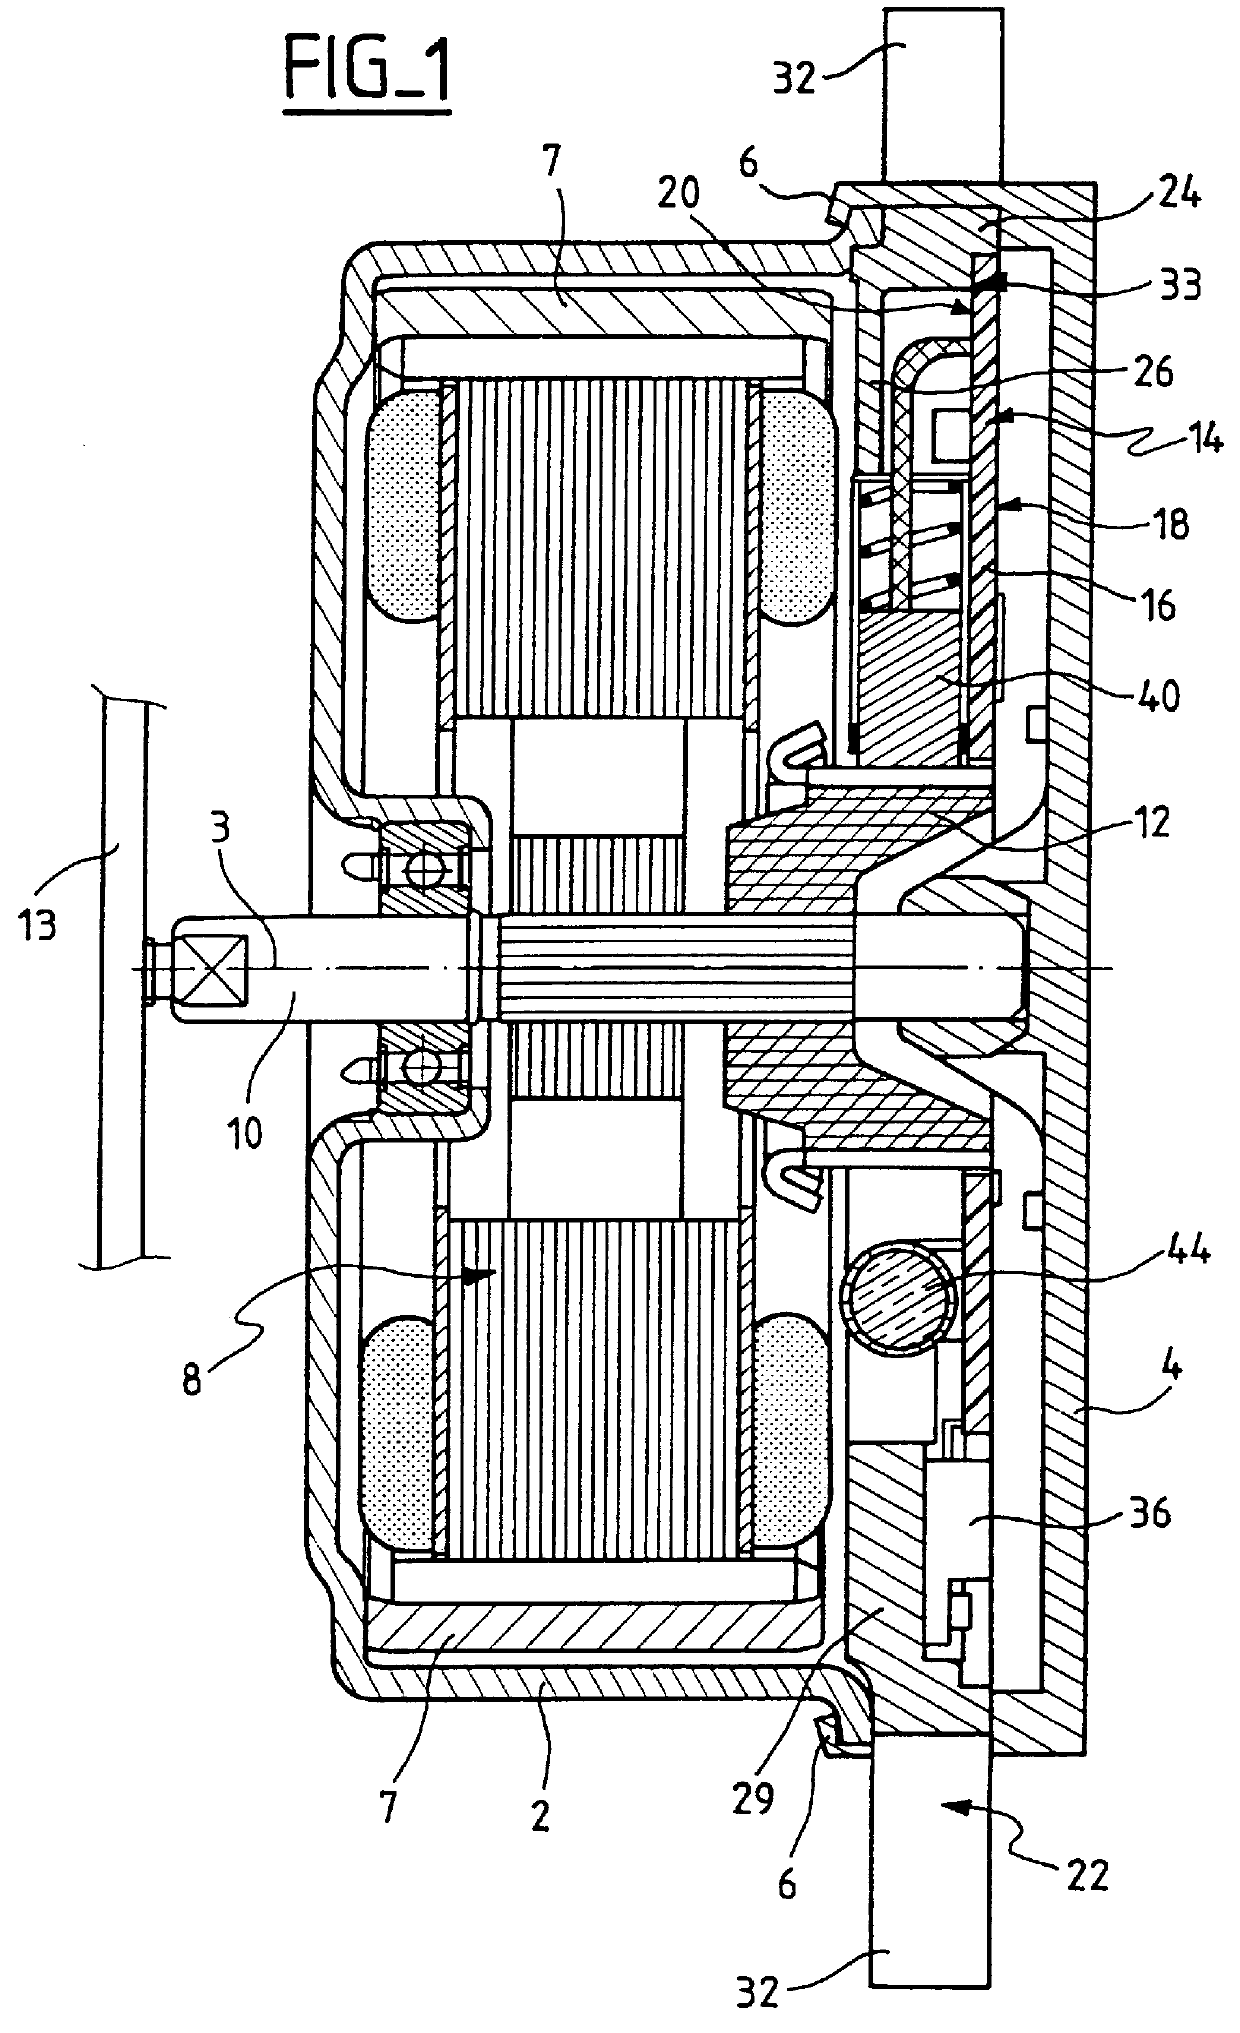 Electric motor incorporating its own electronic control